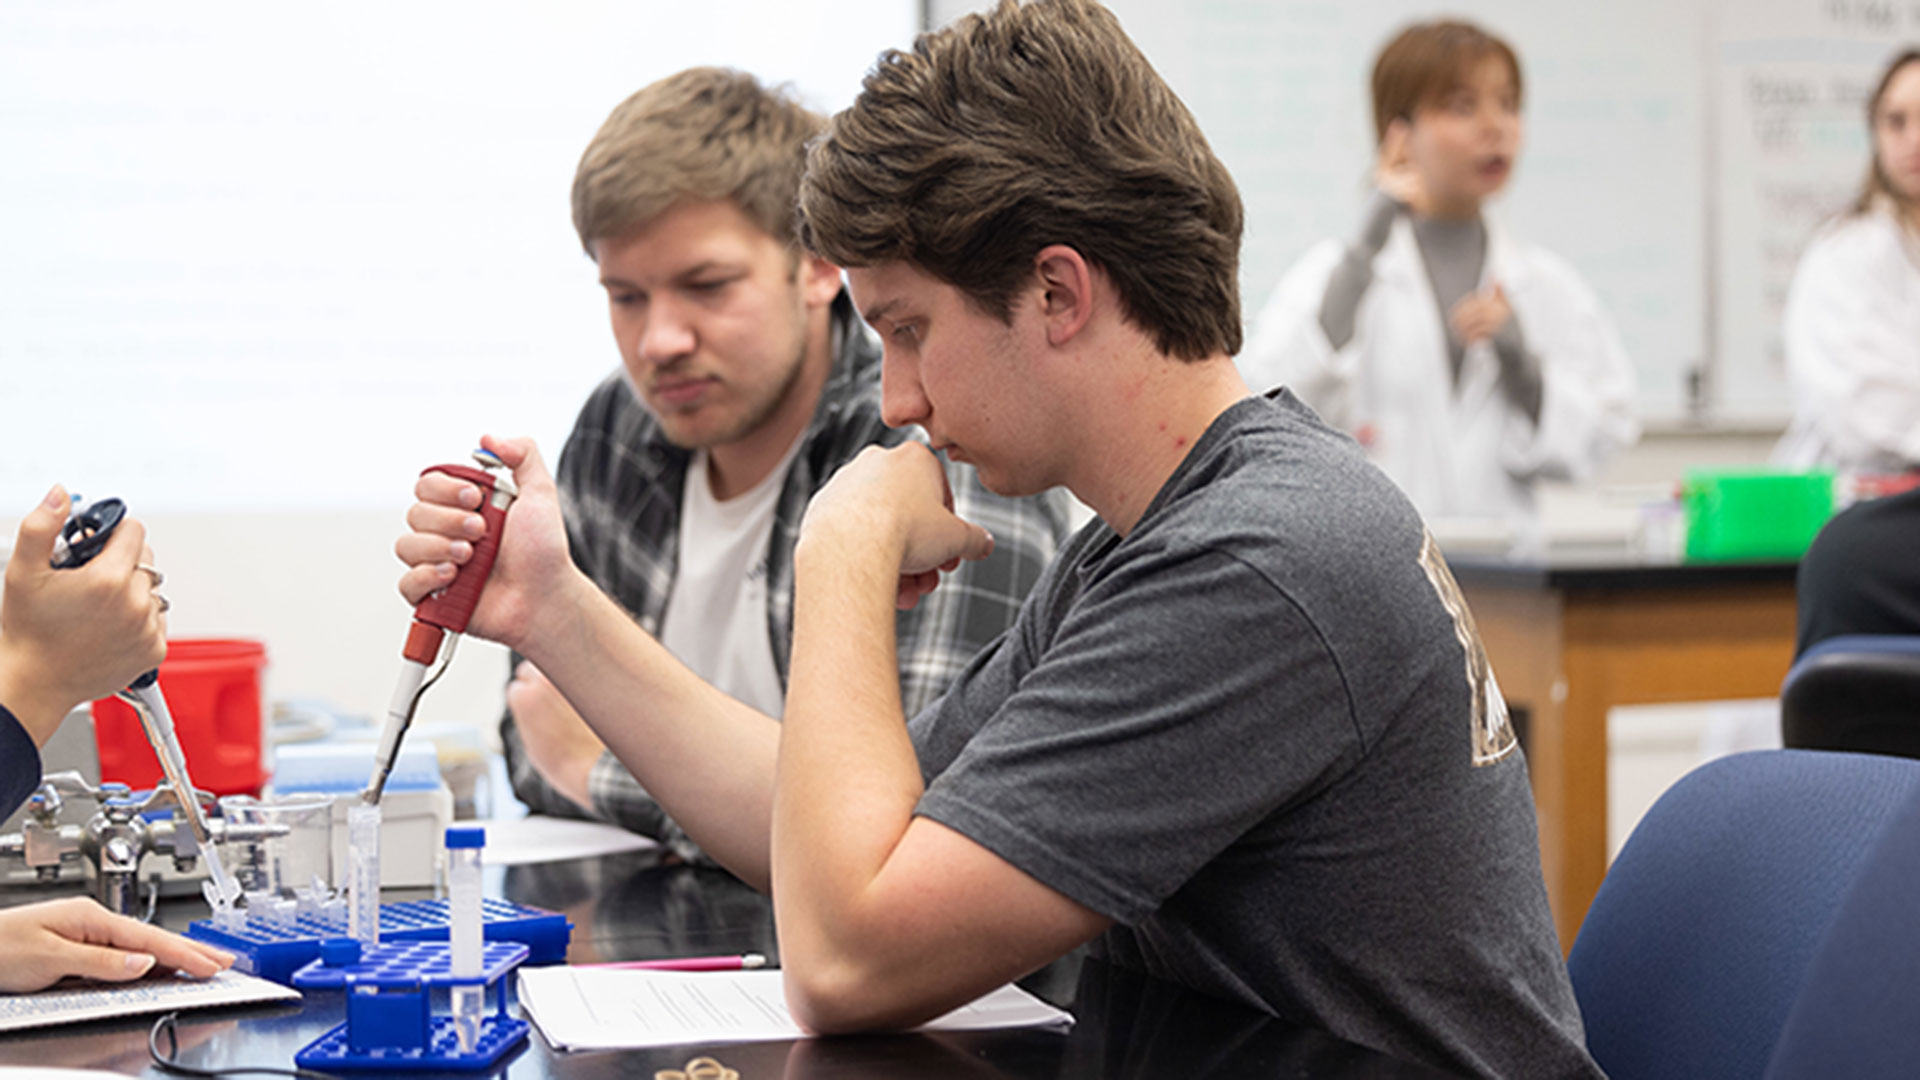 A student uses a pipette to add a liquid to a test tube in his cellular biology class. Beside him, another student watches.